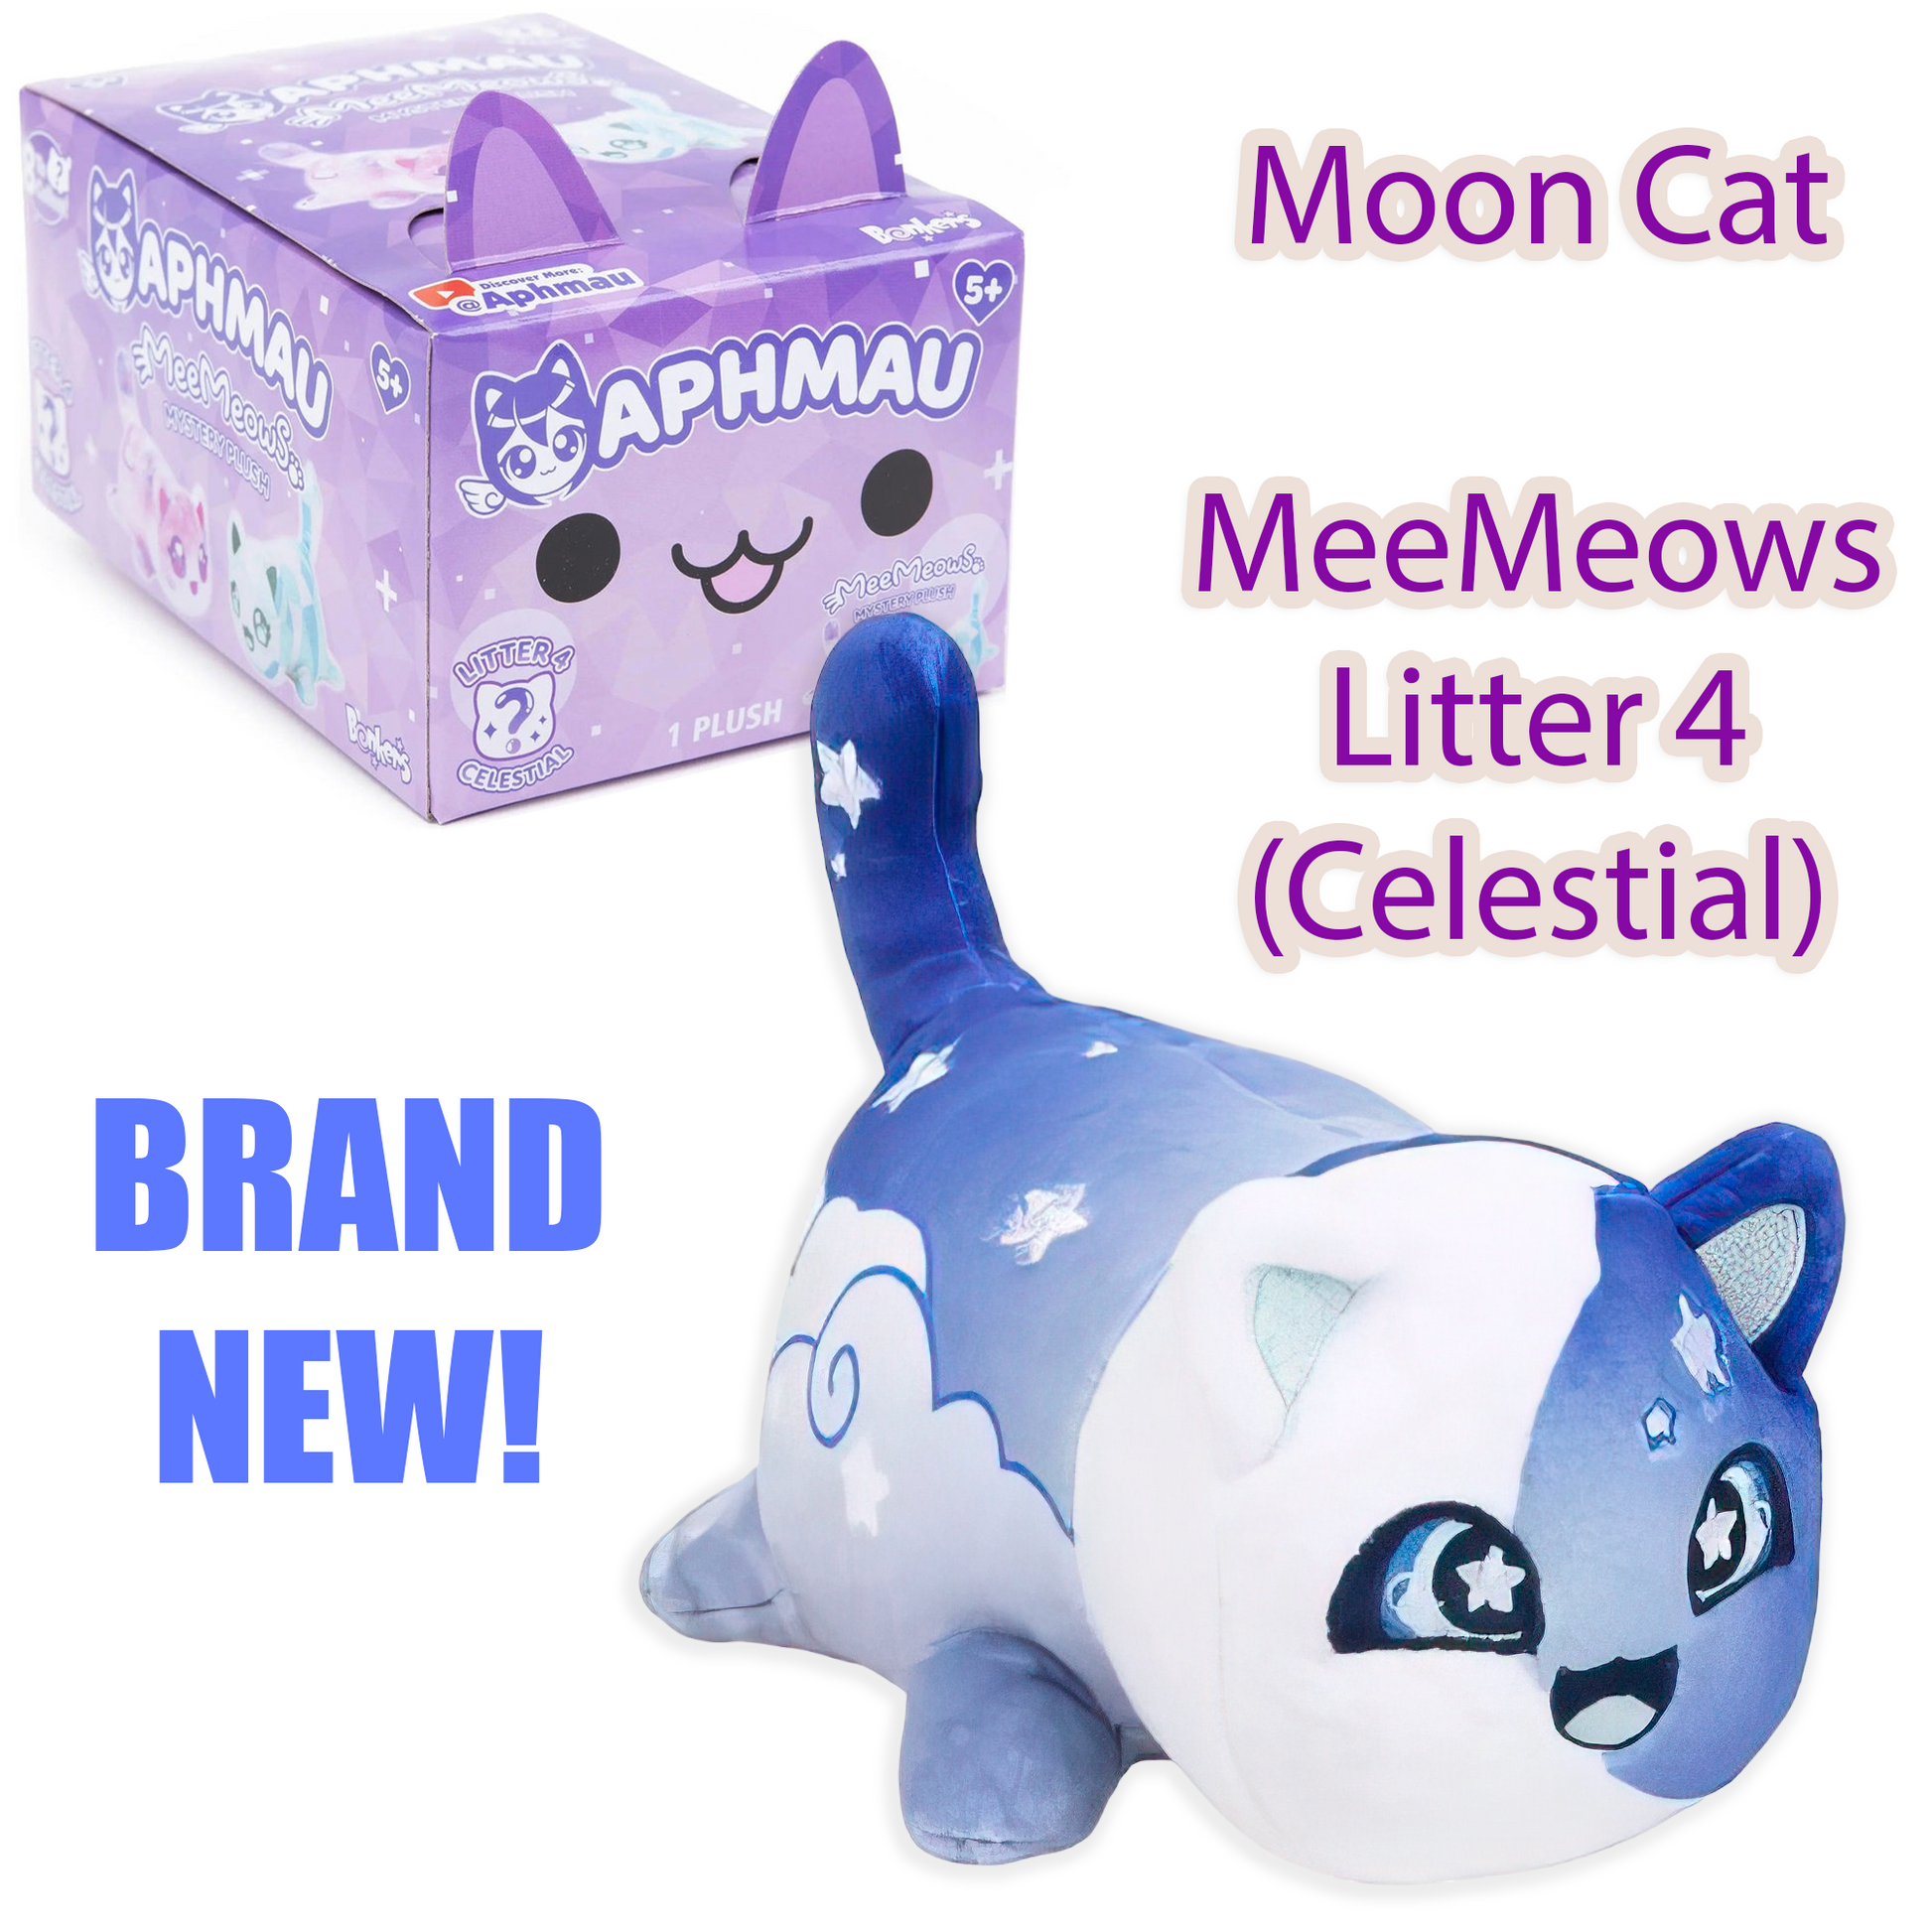 MOON CAT - MeeMeows Litter 4 from Aphmau (BRAND NEW) Cute Kitty